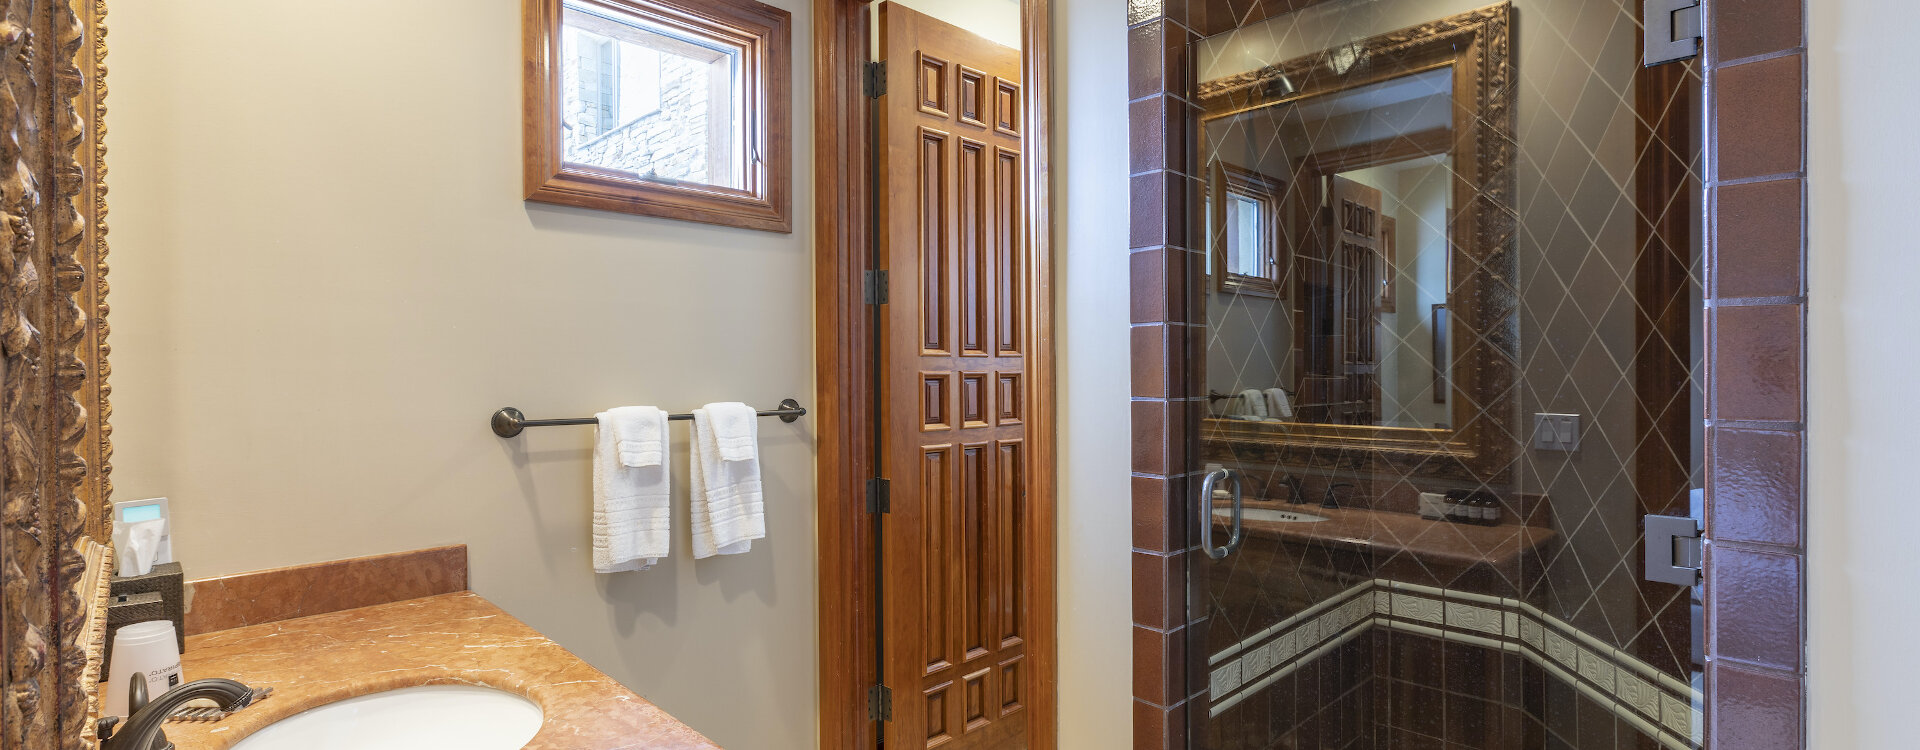 1.29-telluride-gold-hill-second-guest-bathroom